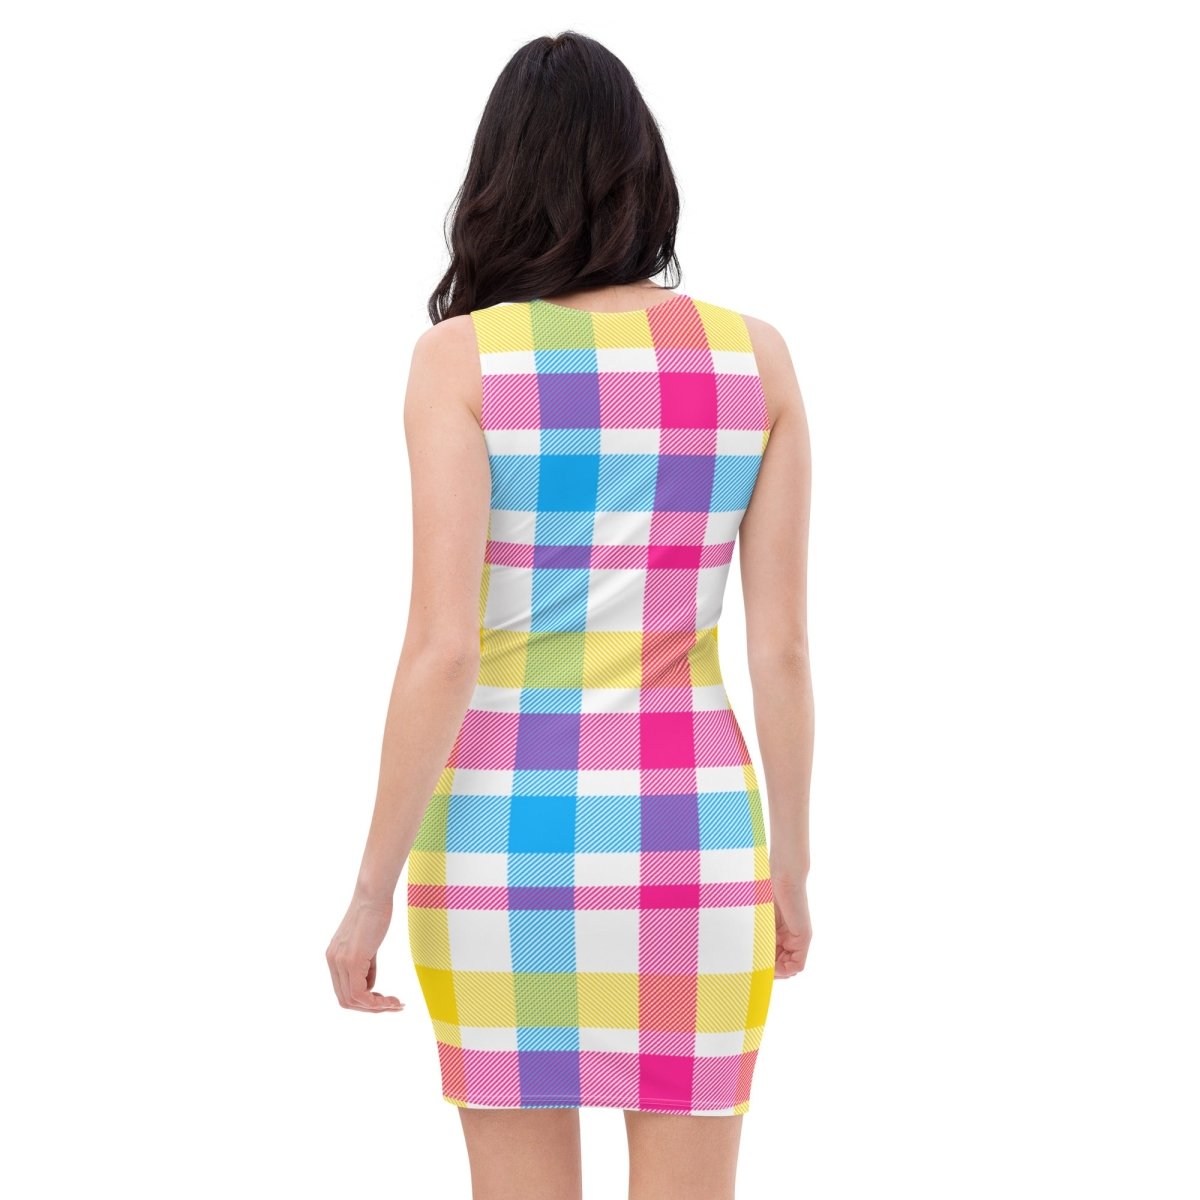 White Plaid Pansexual Fitted Dress - On Trend Shirts